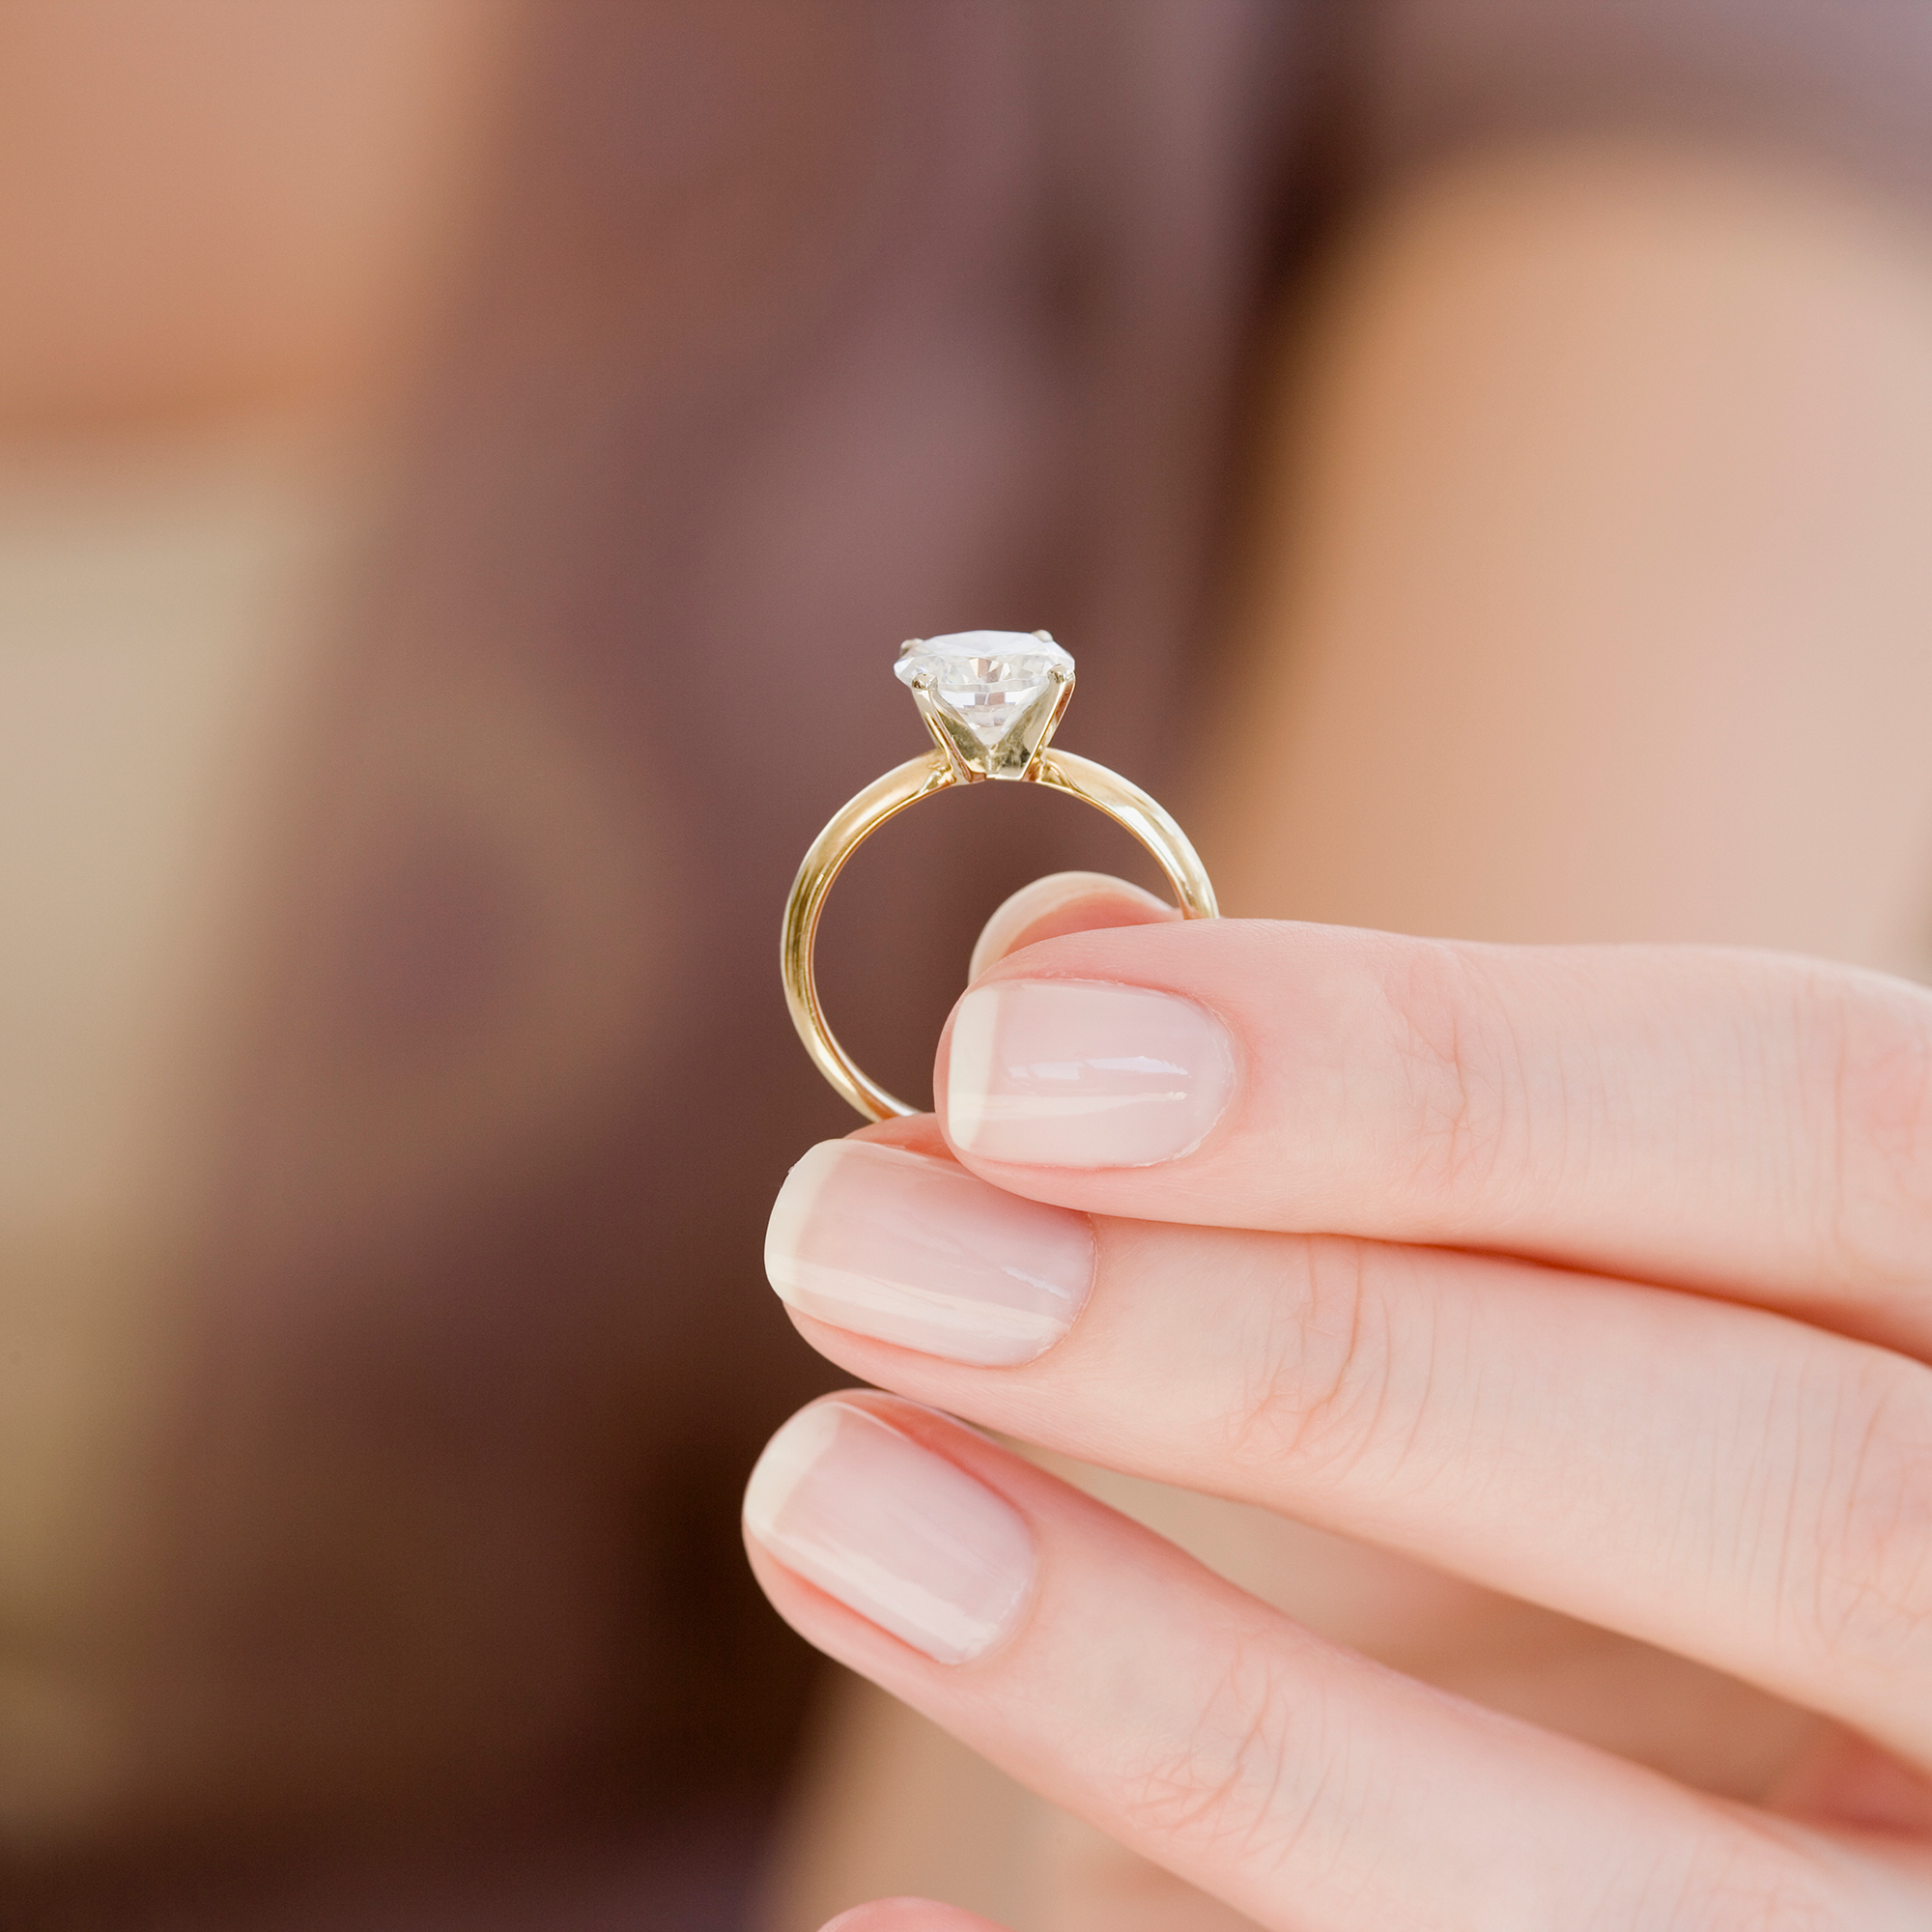 Redesign Engagement ring after divorce - 7 Ideas to try | blingadvisor.com